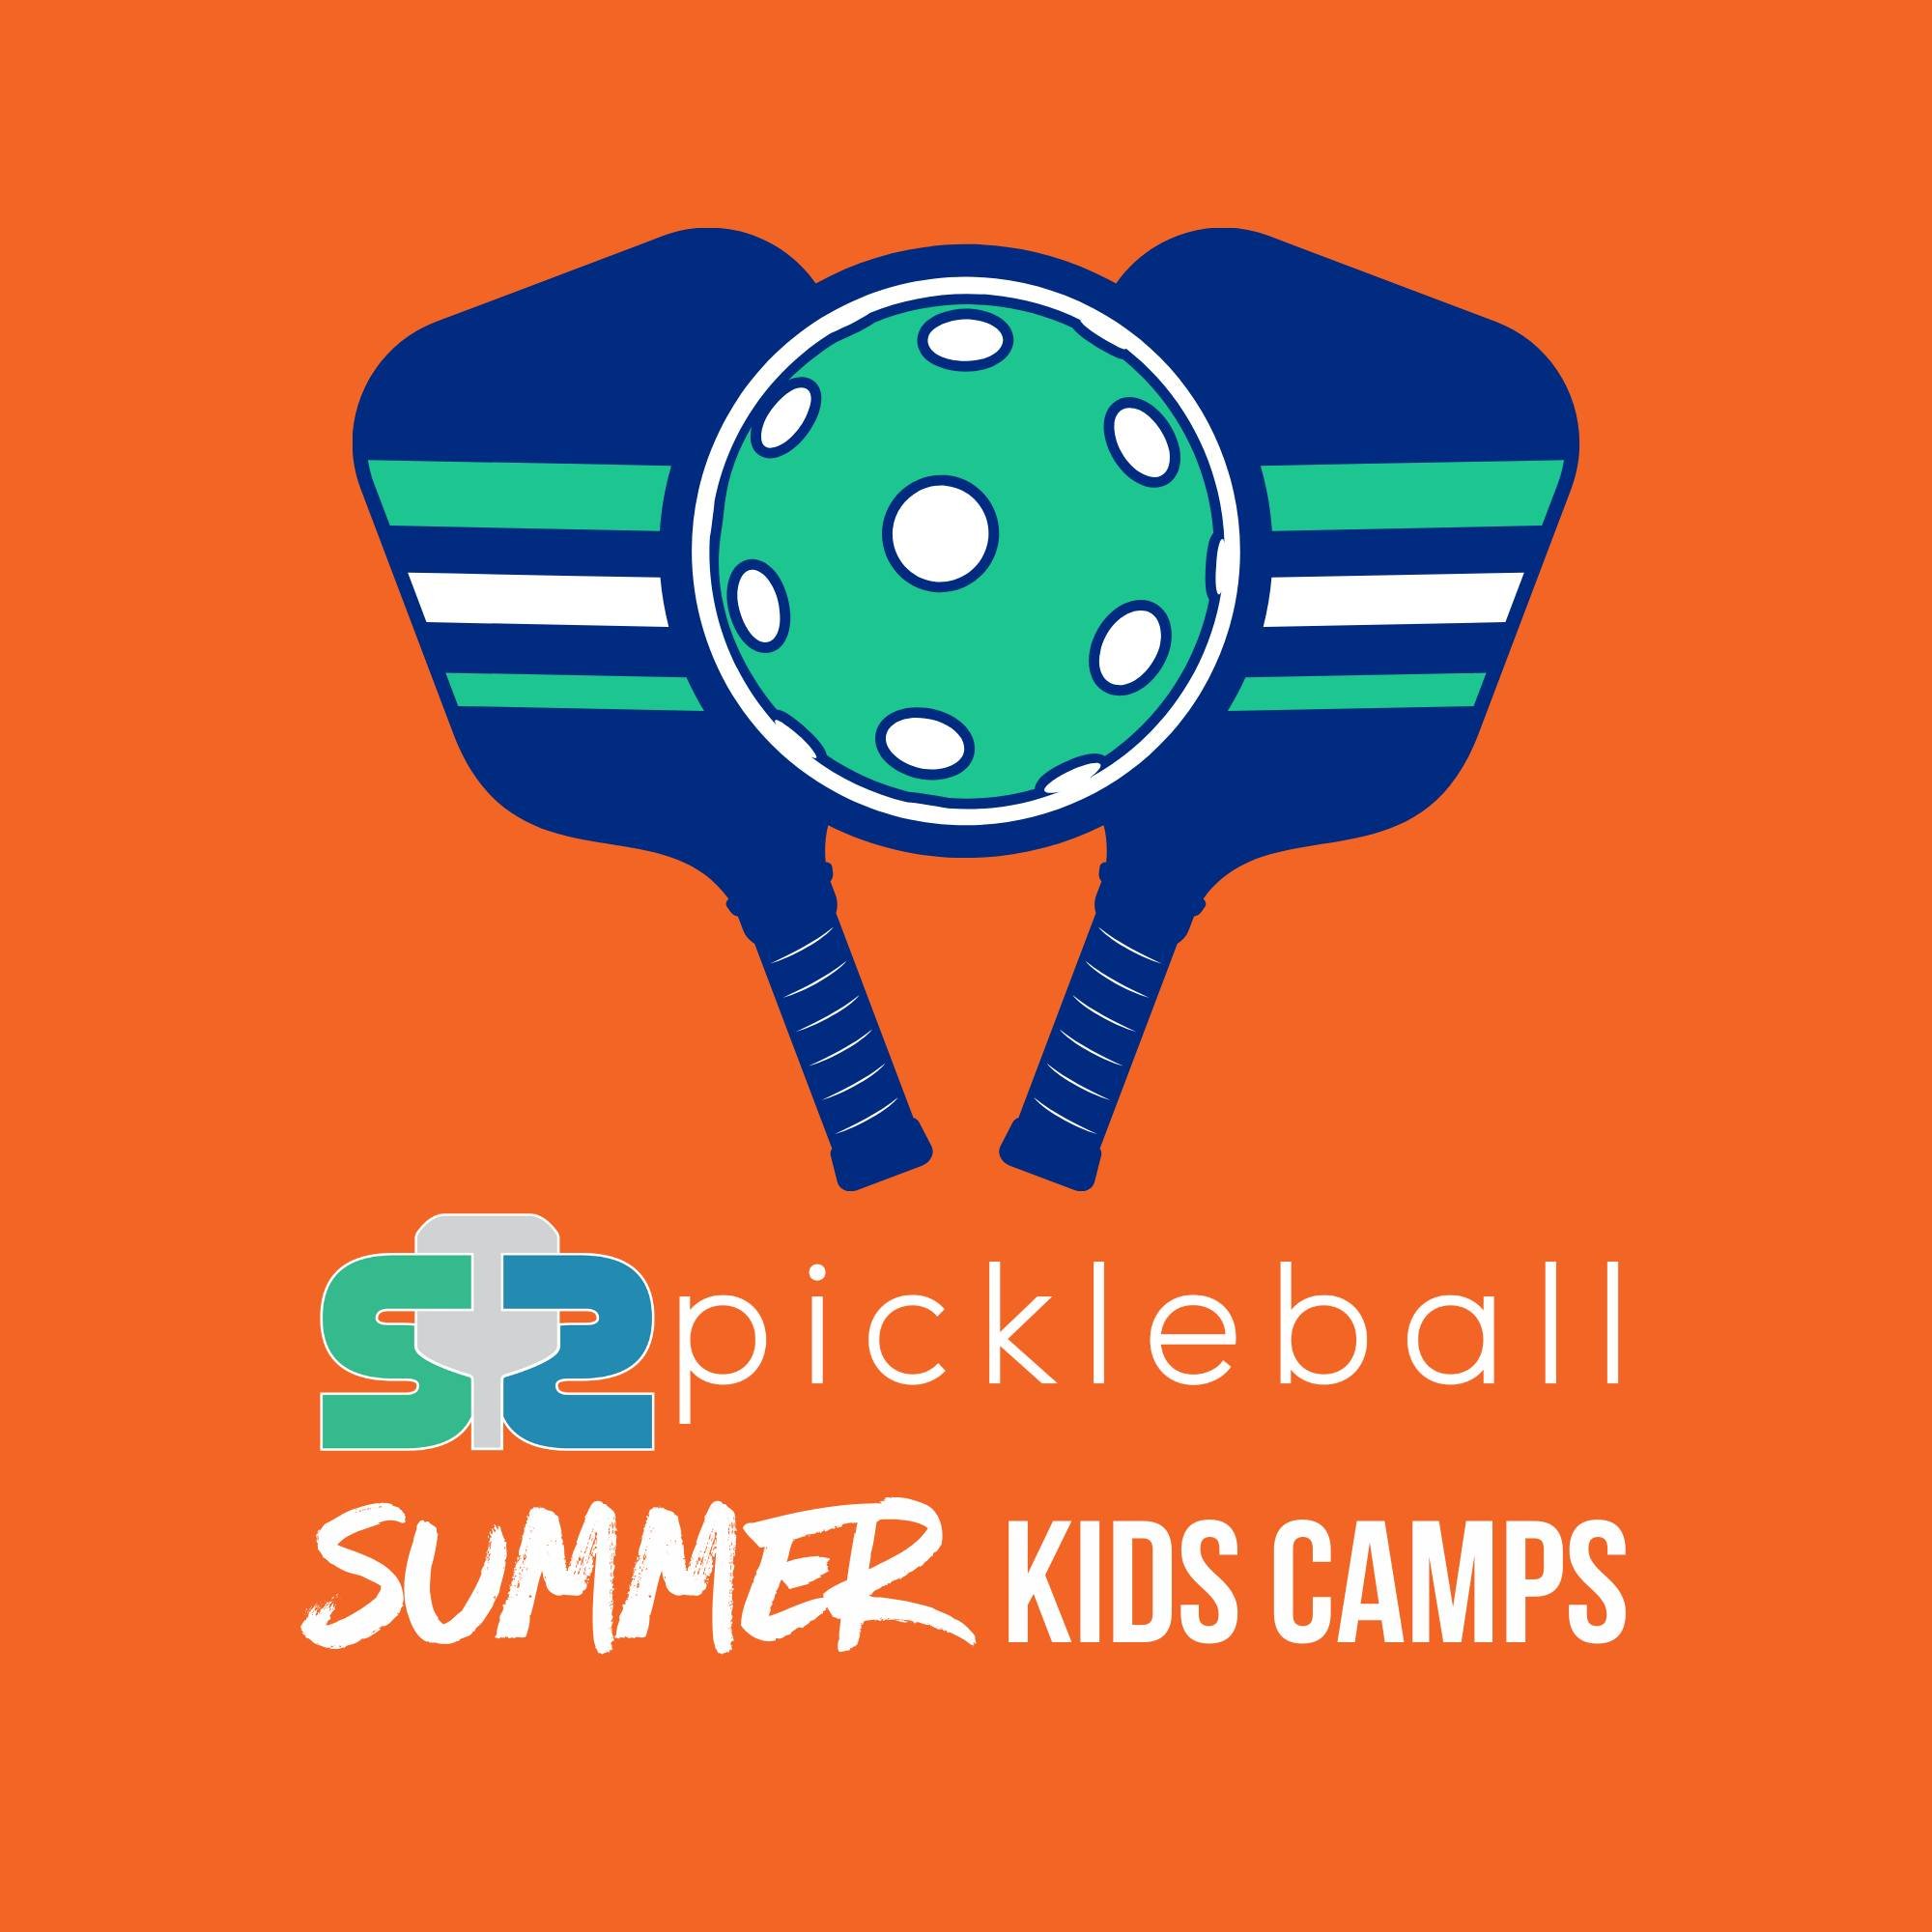 Registration is now open for our Summer Kids Camps! 
.
We are so excited to spend some time in the Air-conditioned, Weather-proofed courts, this summer, sharing our love of pickleball with the next generation!  We have 3 different age groups: 5-7, 8-